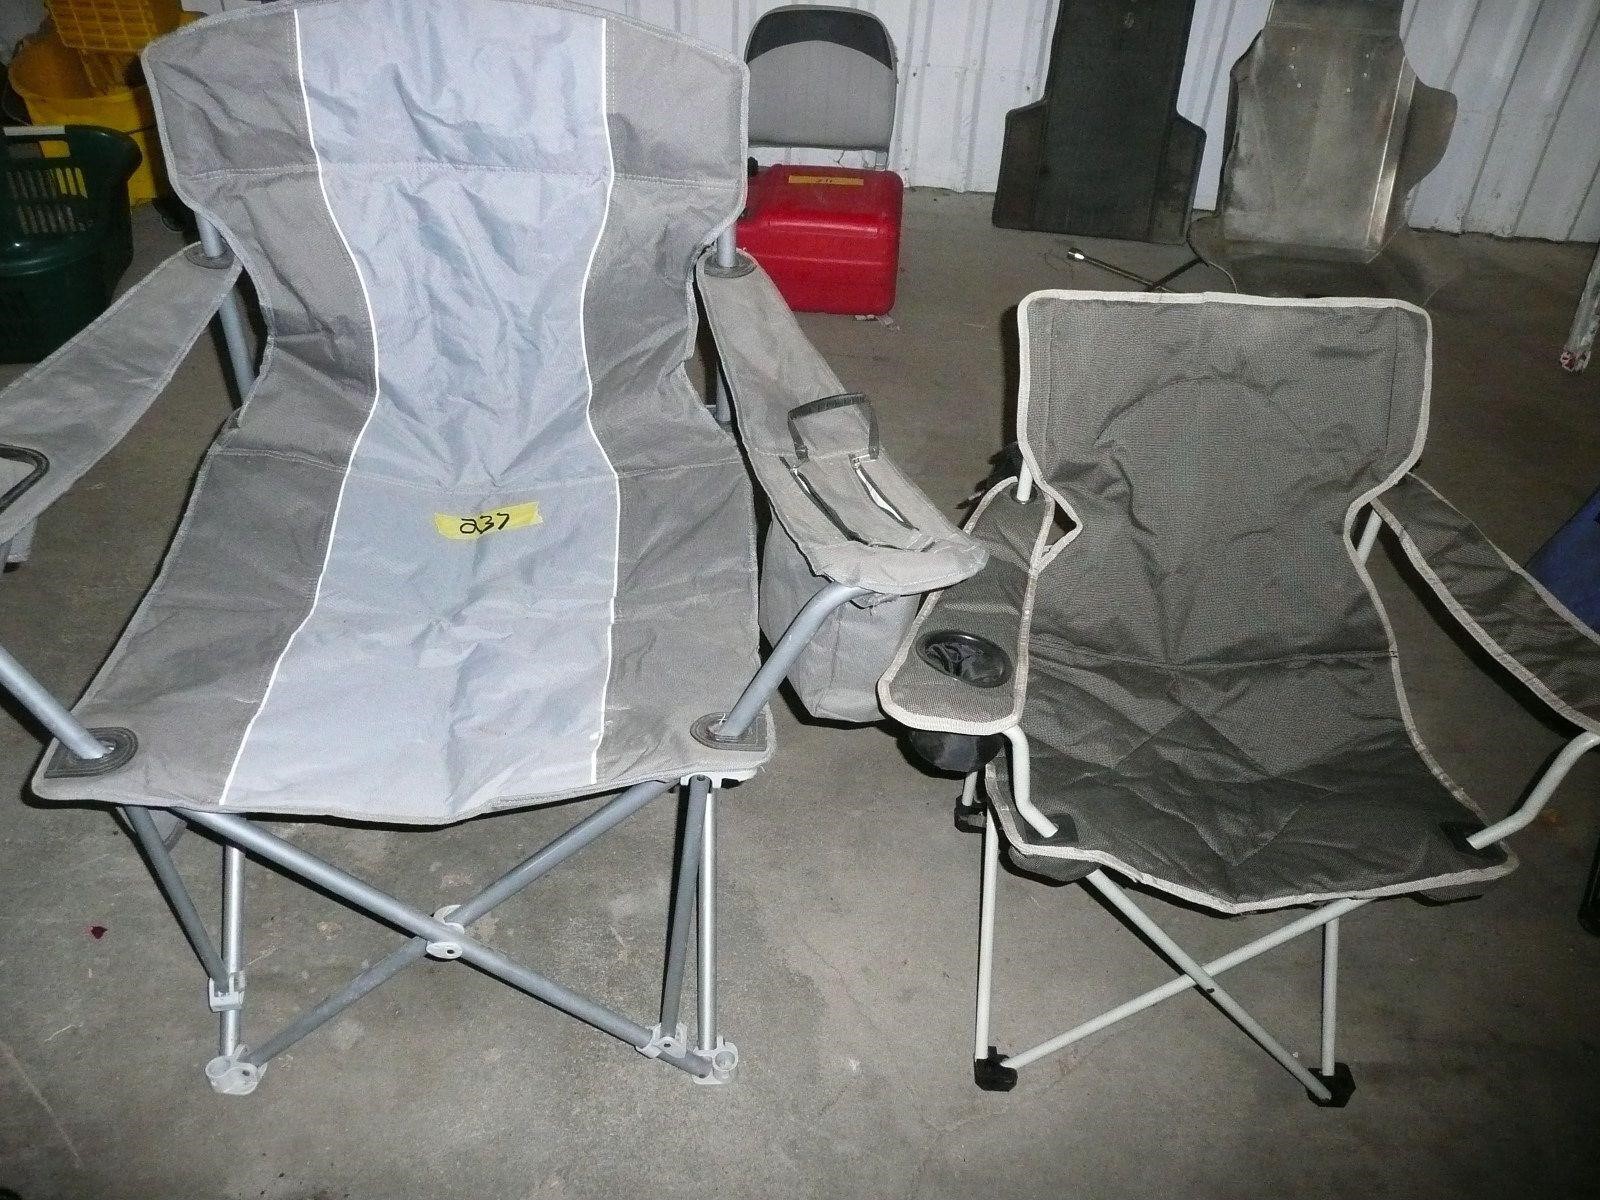 2 Umbrella Chairs, 1 is very Large